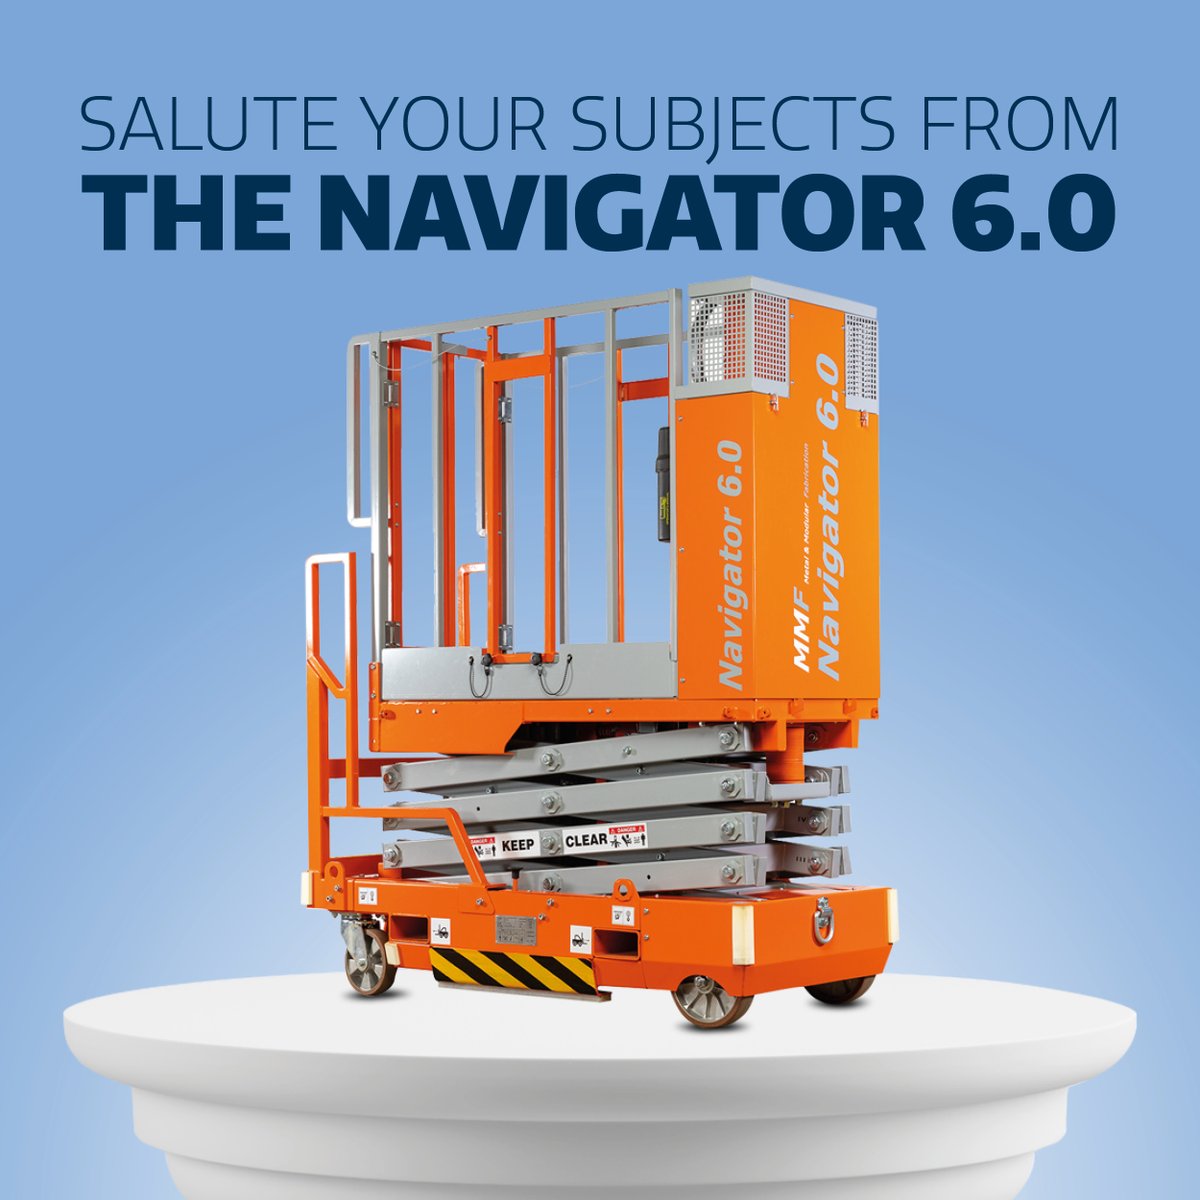 Our first product is the #Navigator 6.0, a Manual Lift #AccessPlatform 💎 Lord it up from a lofty 6-metre height. This ZERO EMISSIONS platform is powered by unseen forces and requires no batteries or power source! #Hire yours now: bit.ly/3Vvnf6D